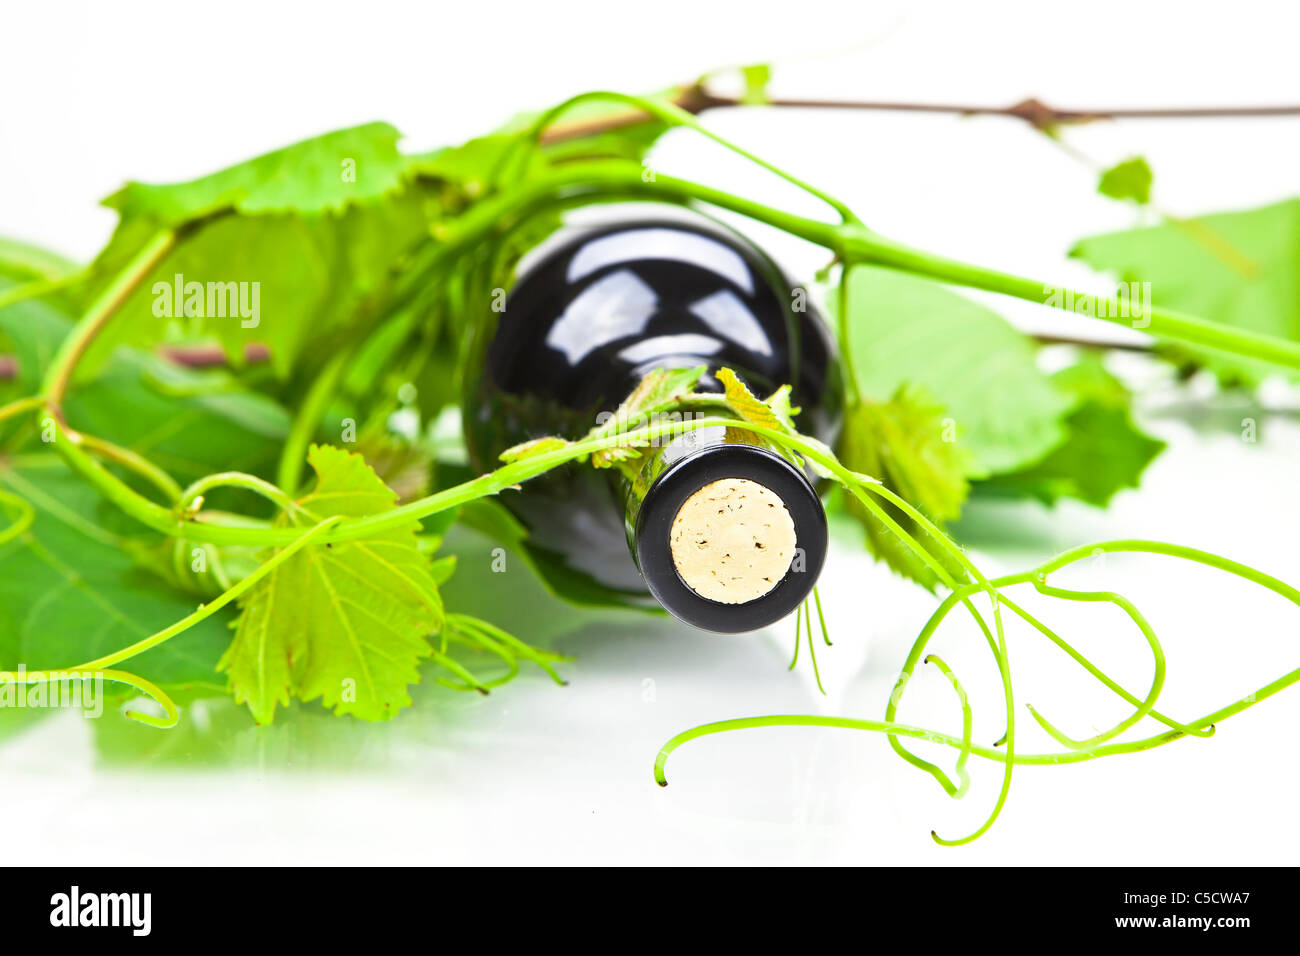 A bottle of red wine with leaves and tendrils Stock Photo